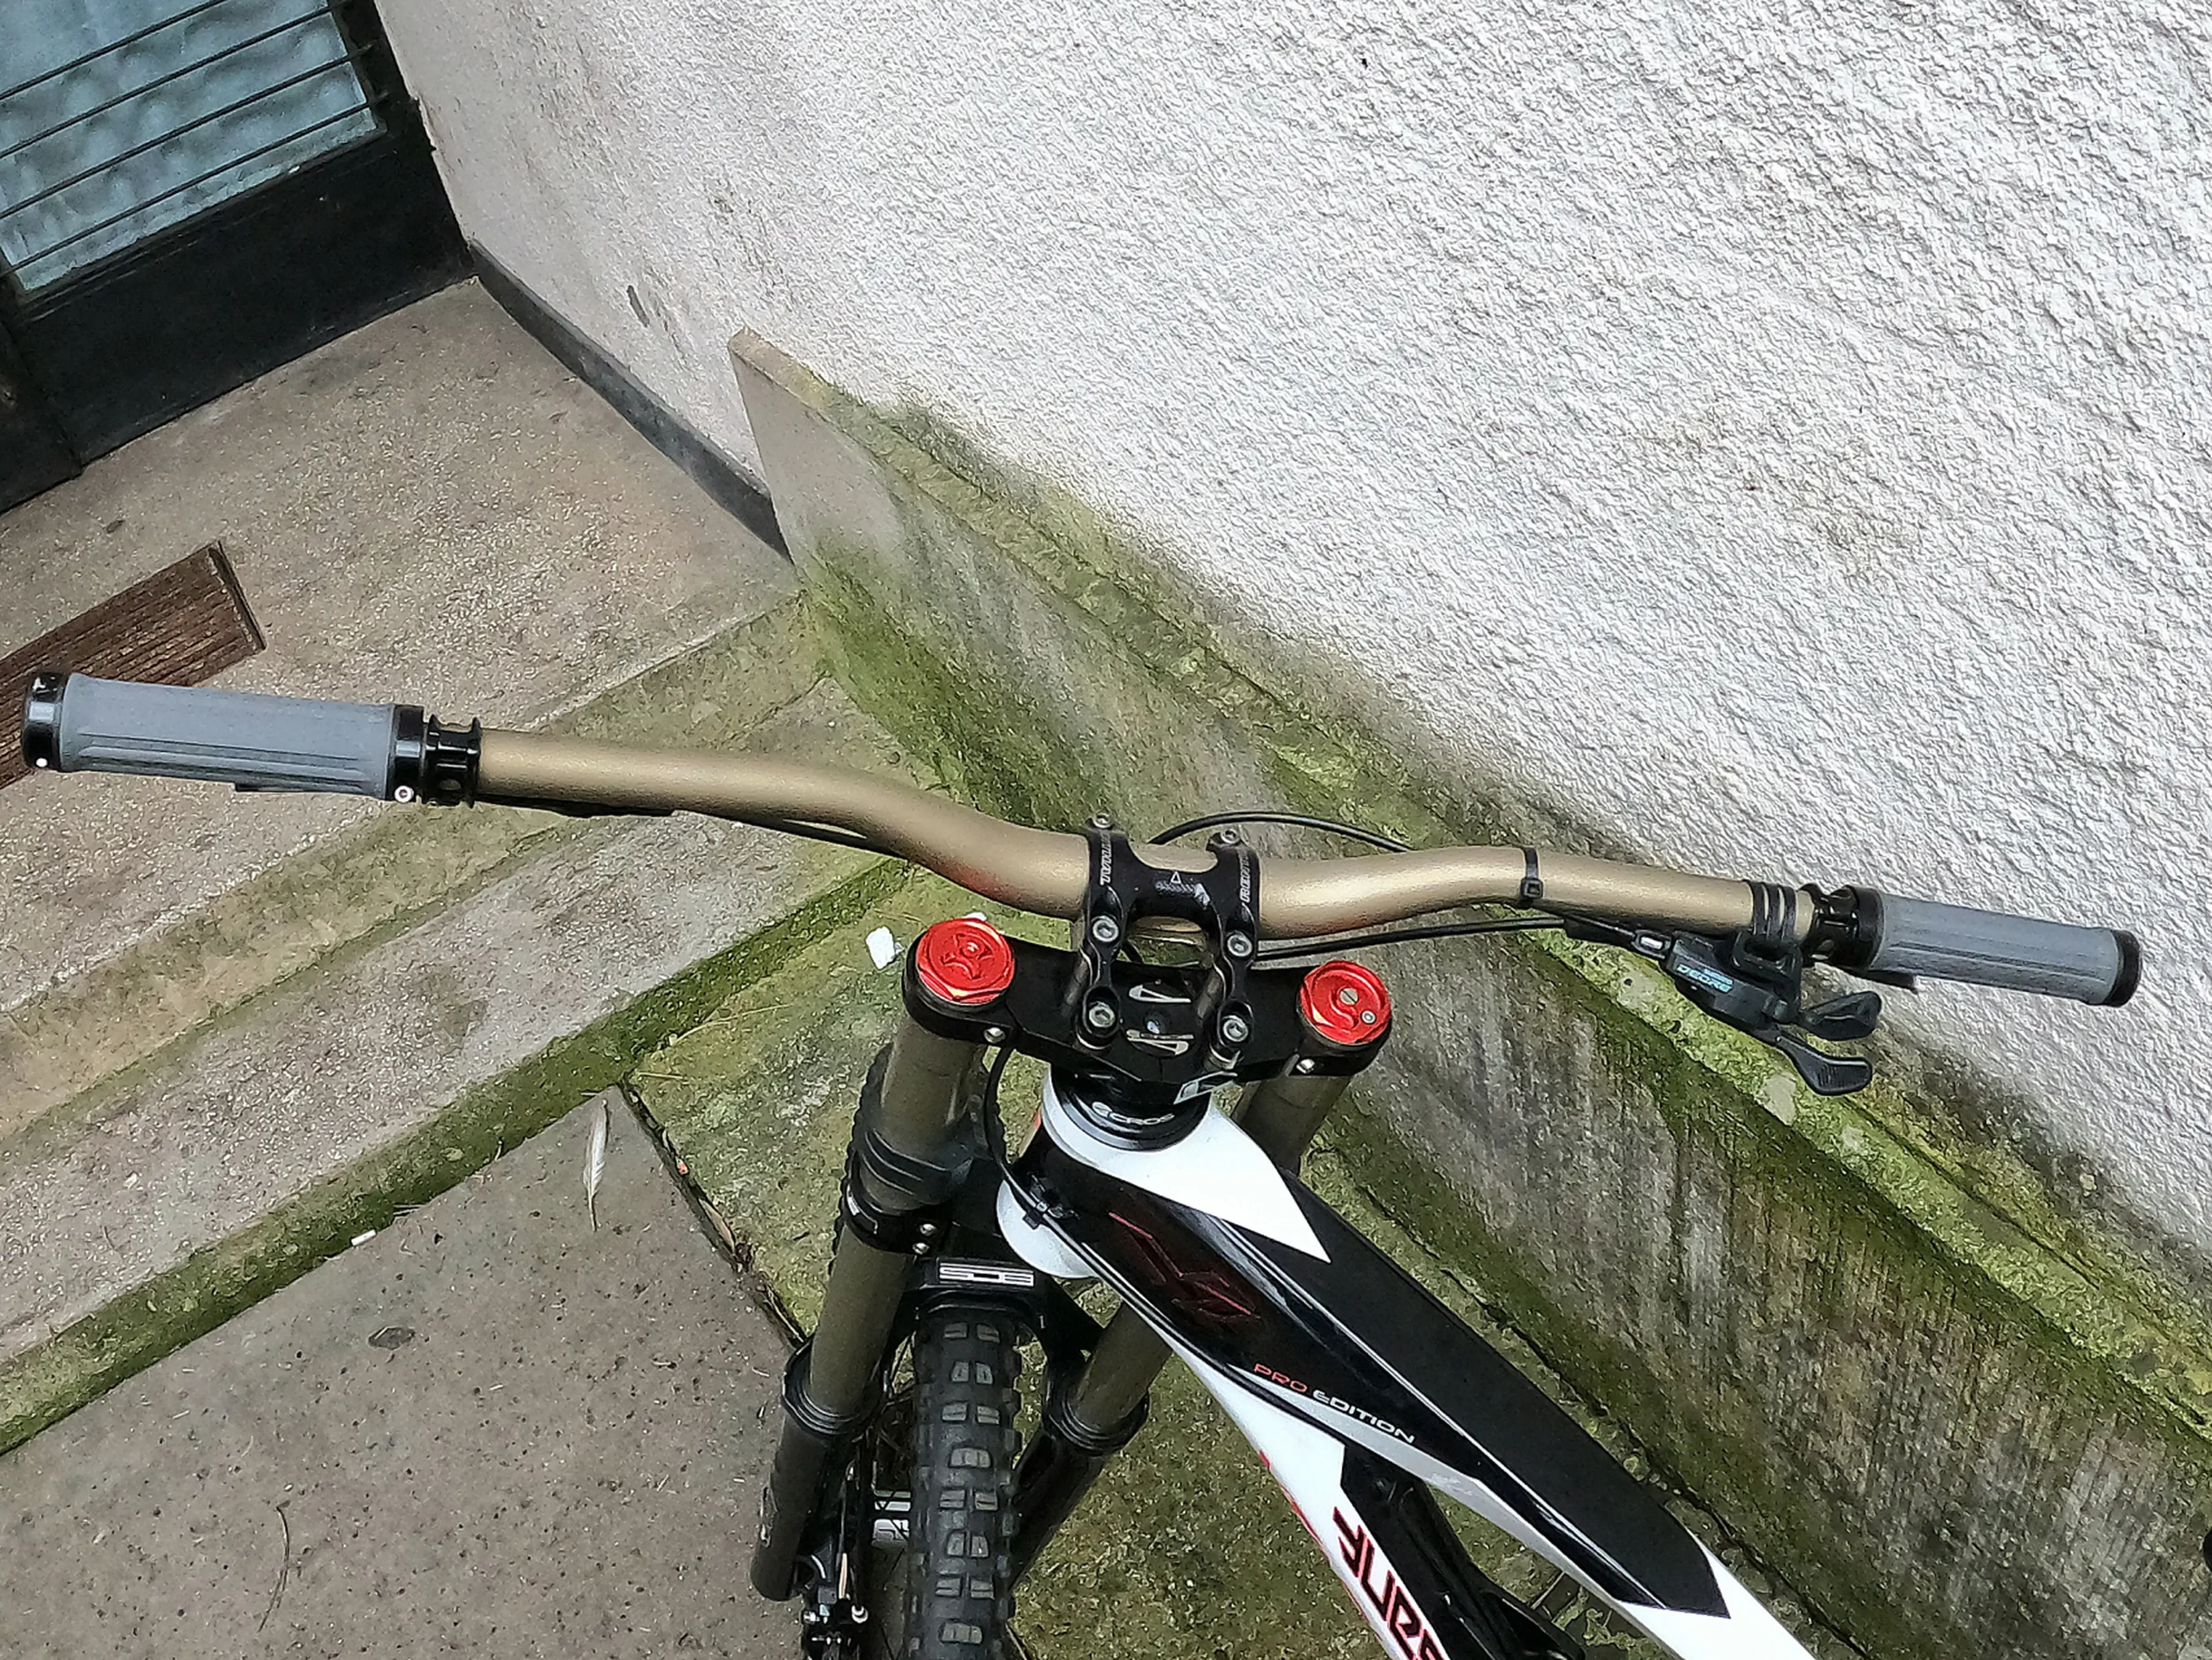 8. YT Industries Pro edition